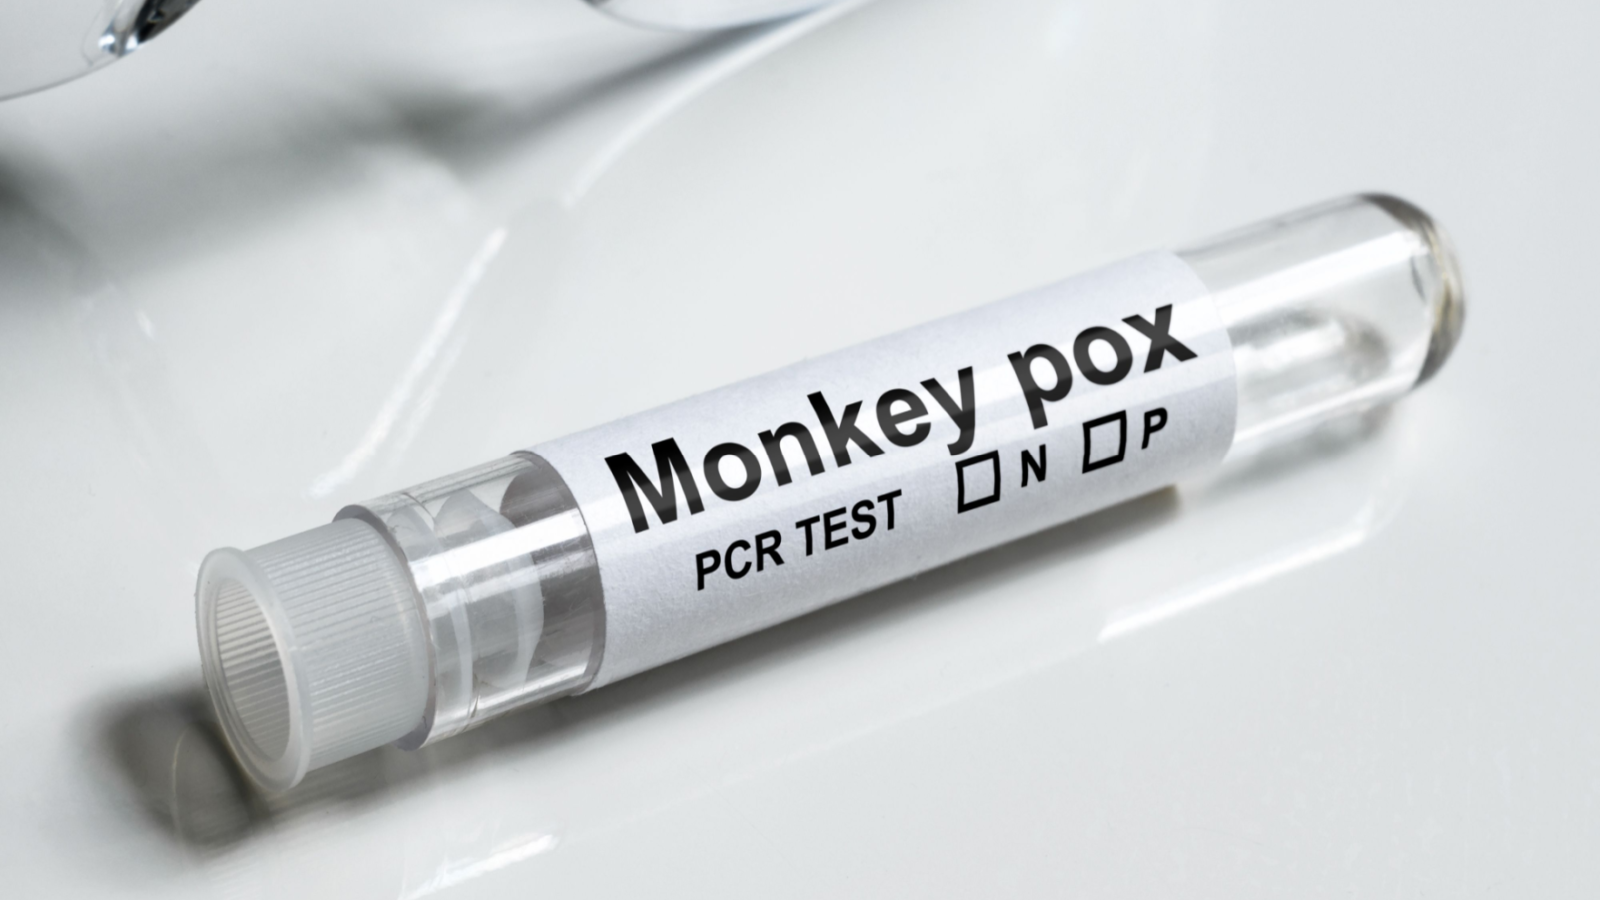 Monkeypox test tube on white table close-up. Medical kit for monkey pox virus diagnostics and smallpox research. Concept of monkeypox, PCR testing, result, science, laboratory, health and cure. WETG Stock